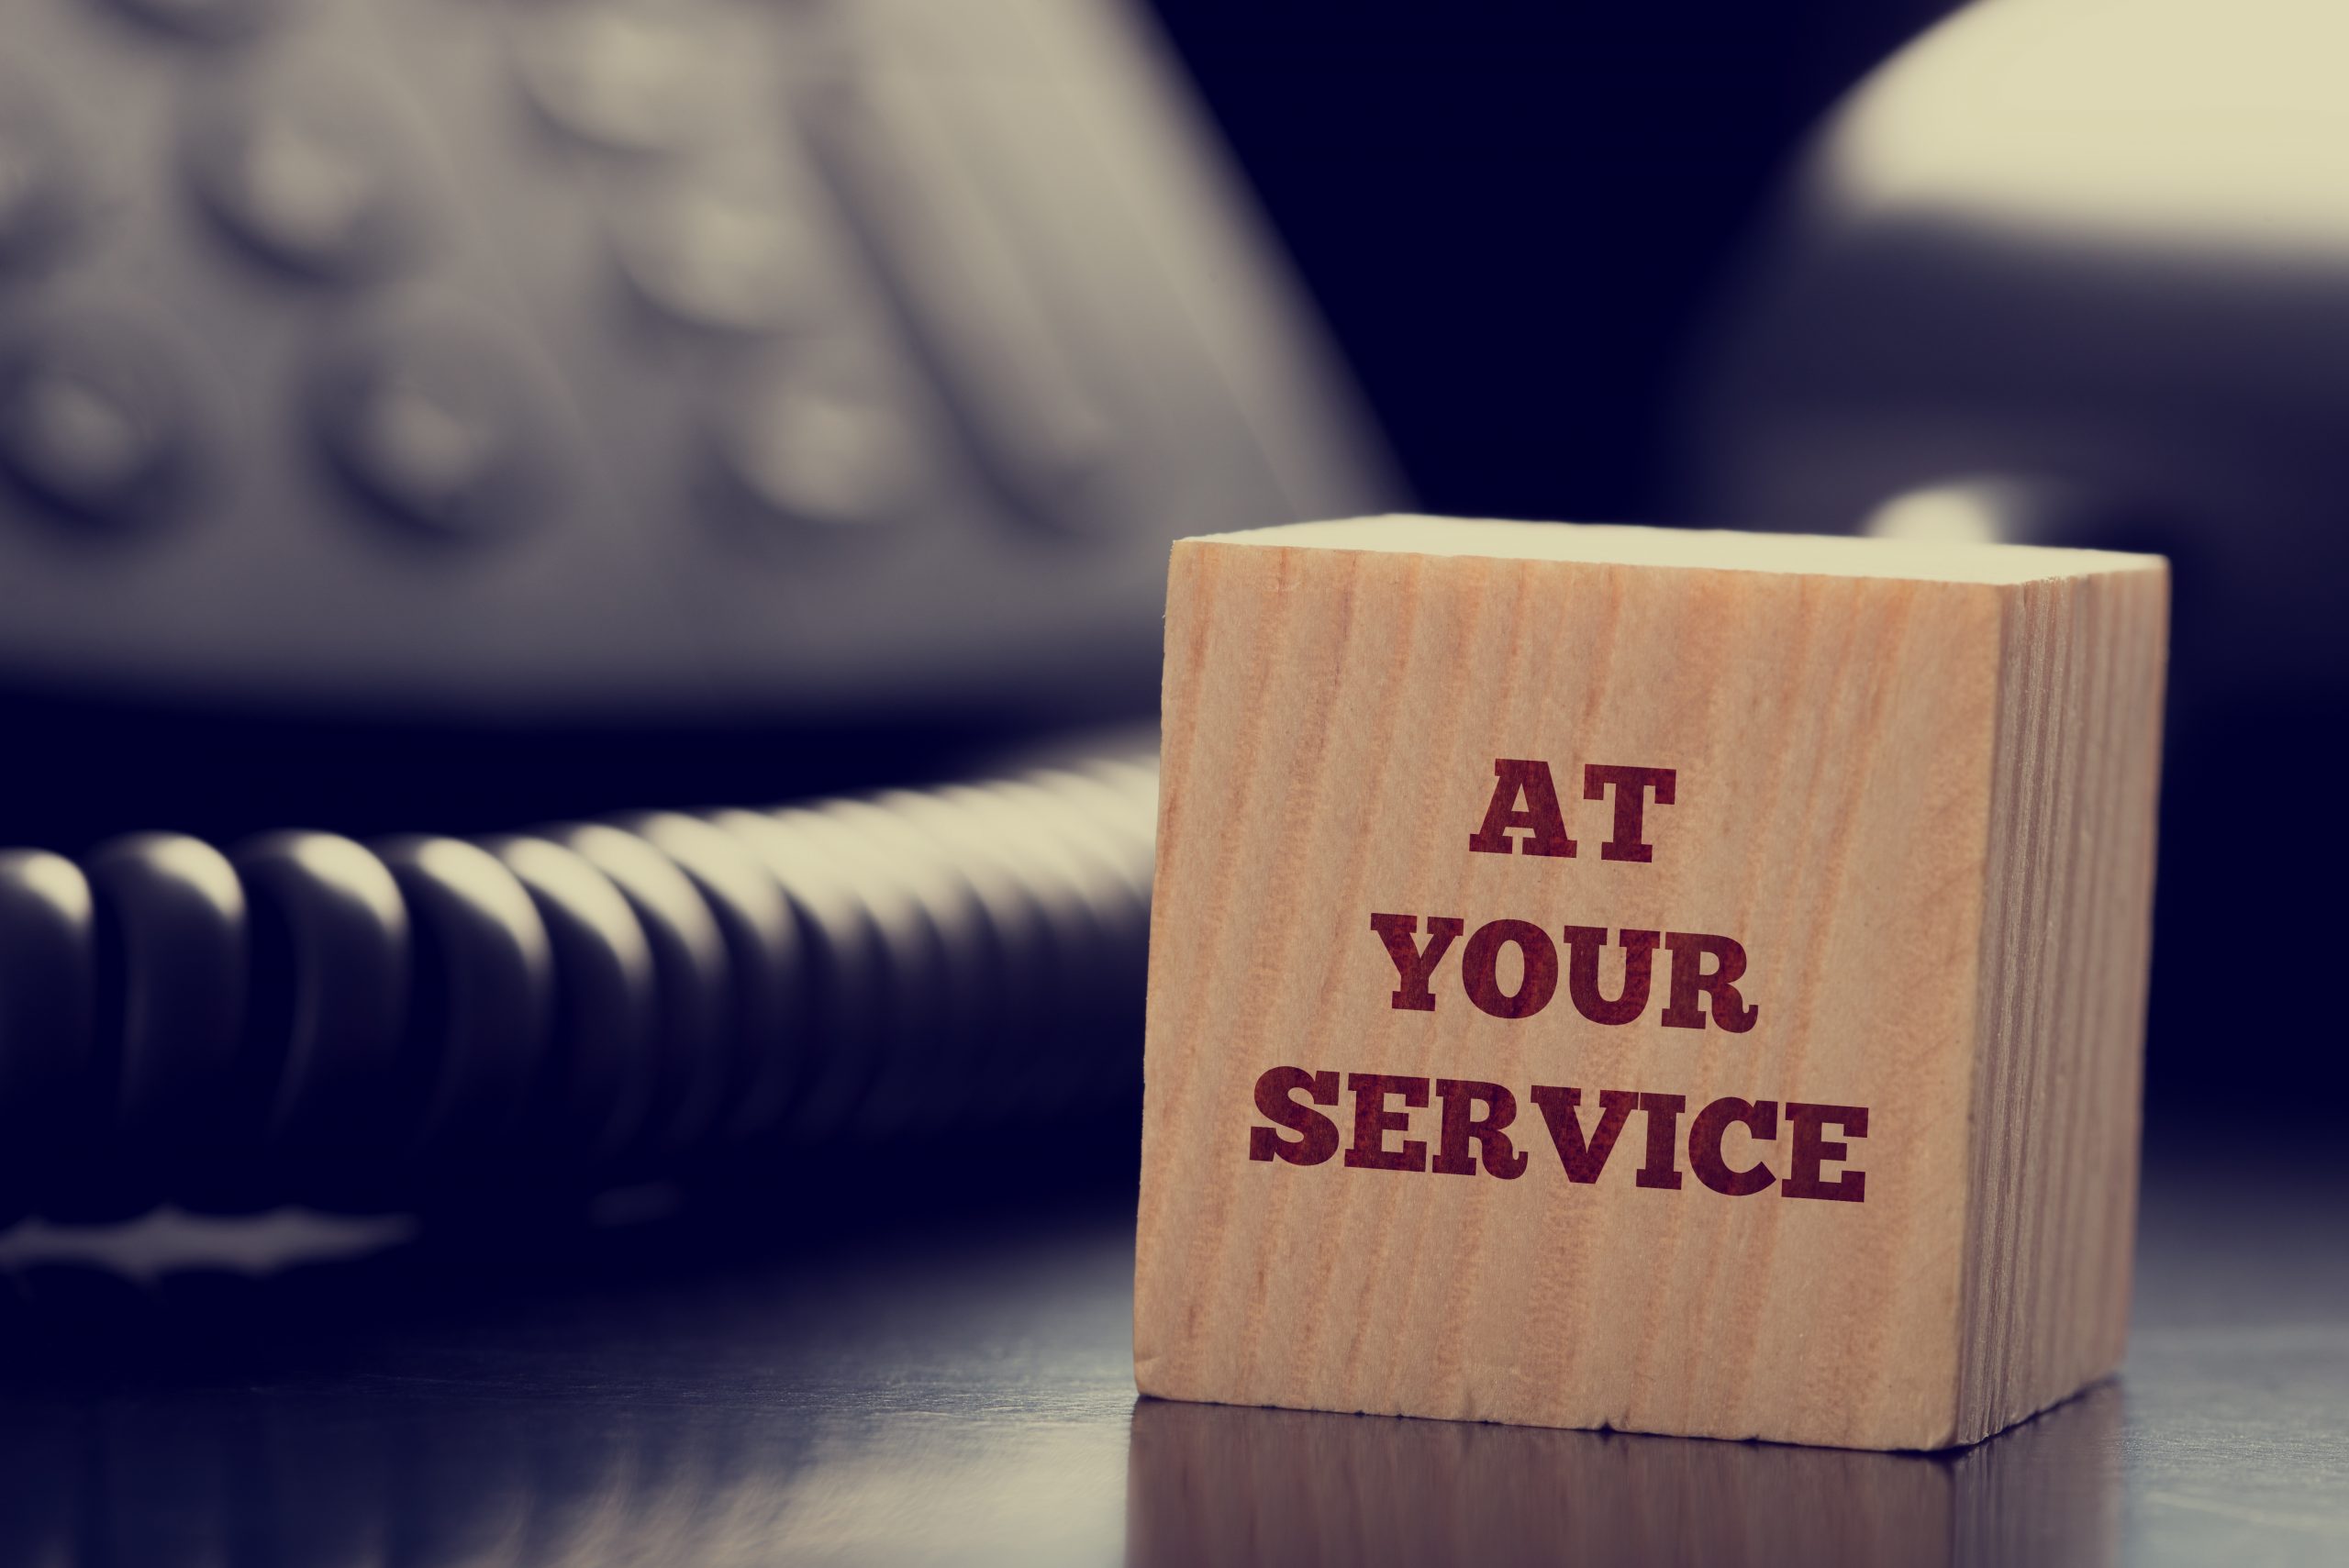 At Your Service written on a wooden cube in front of a telephone conceptual of help, client services, assistance, expertise and consultancy.